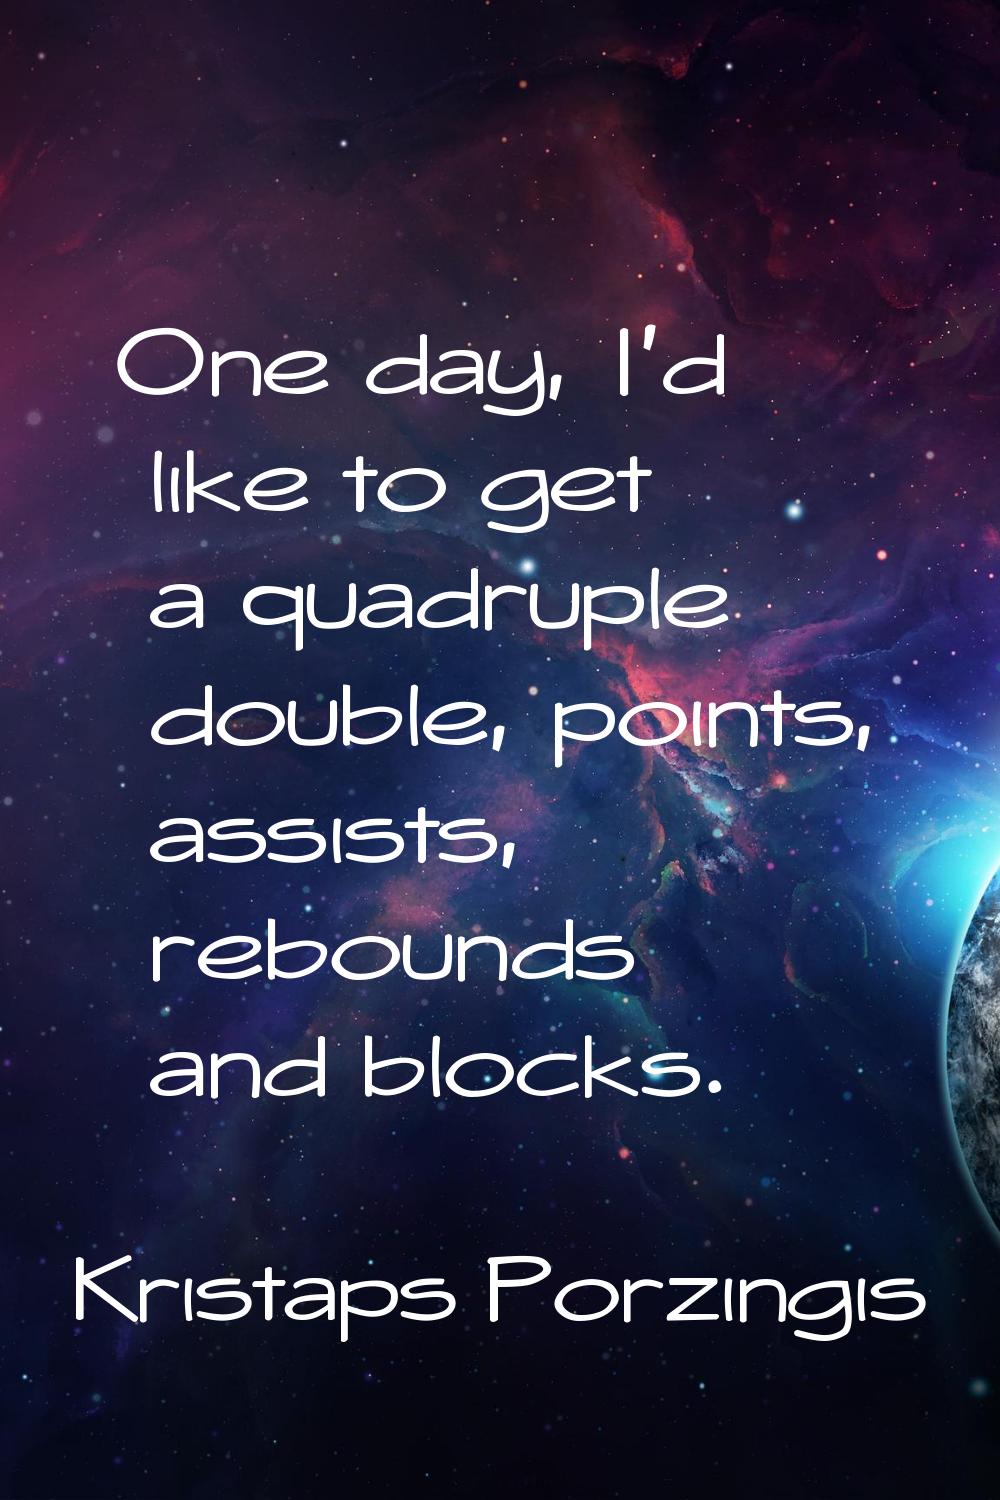 One day, I'd like to get a quadruple double, points, assists, rebounds and blocks.